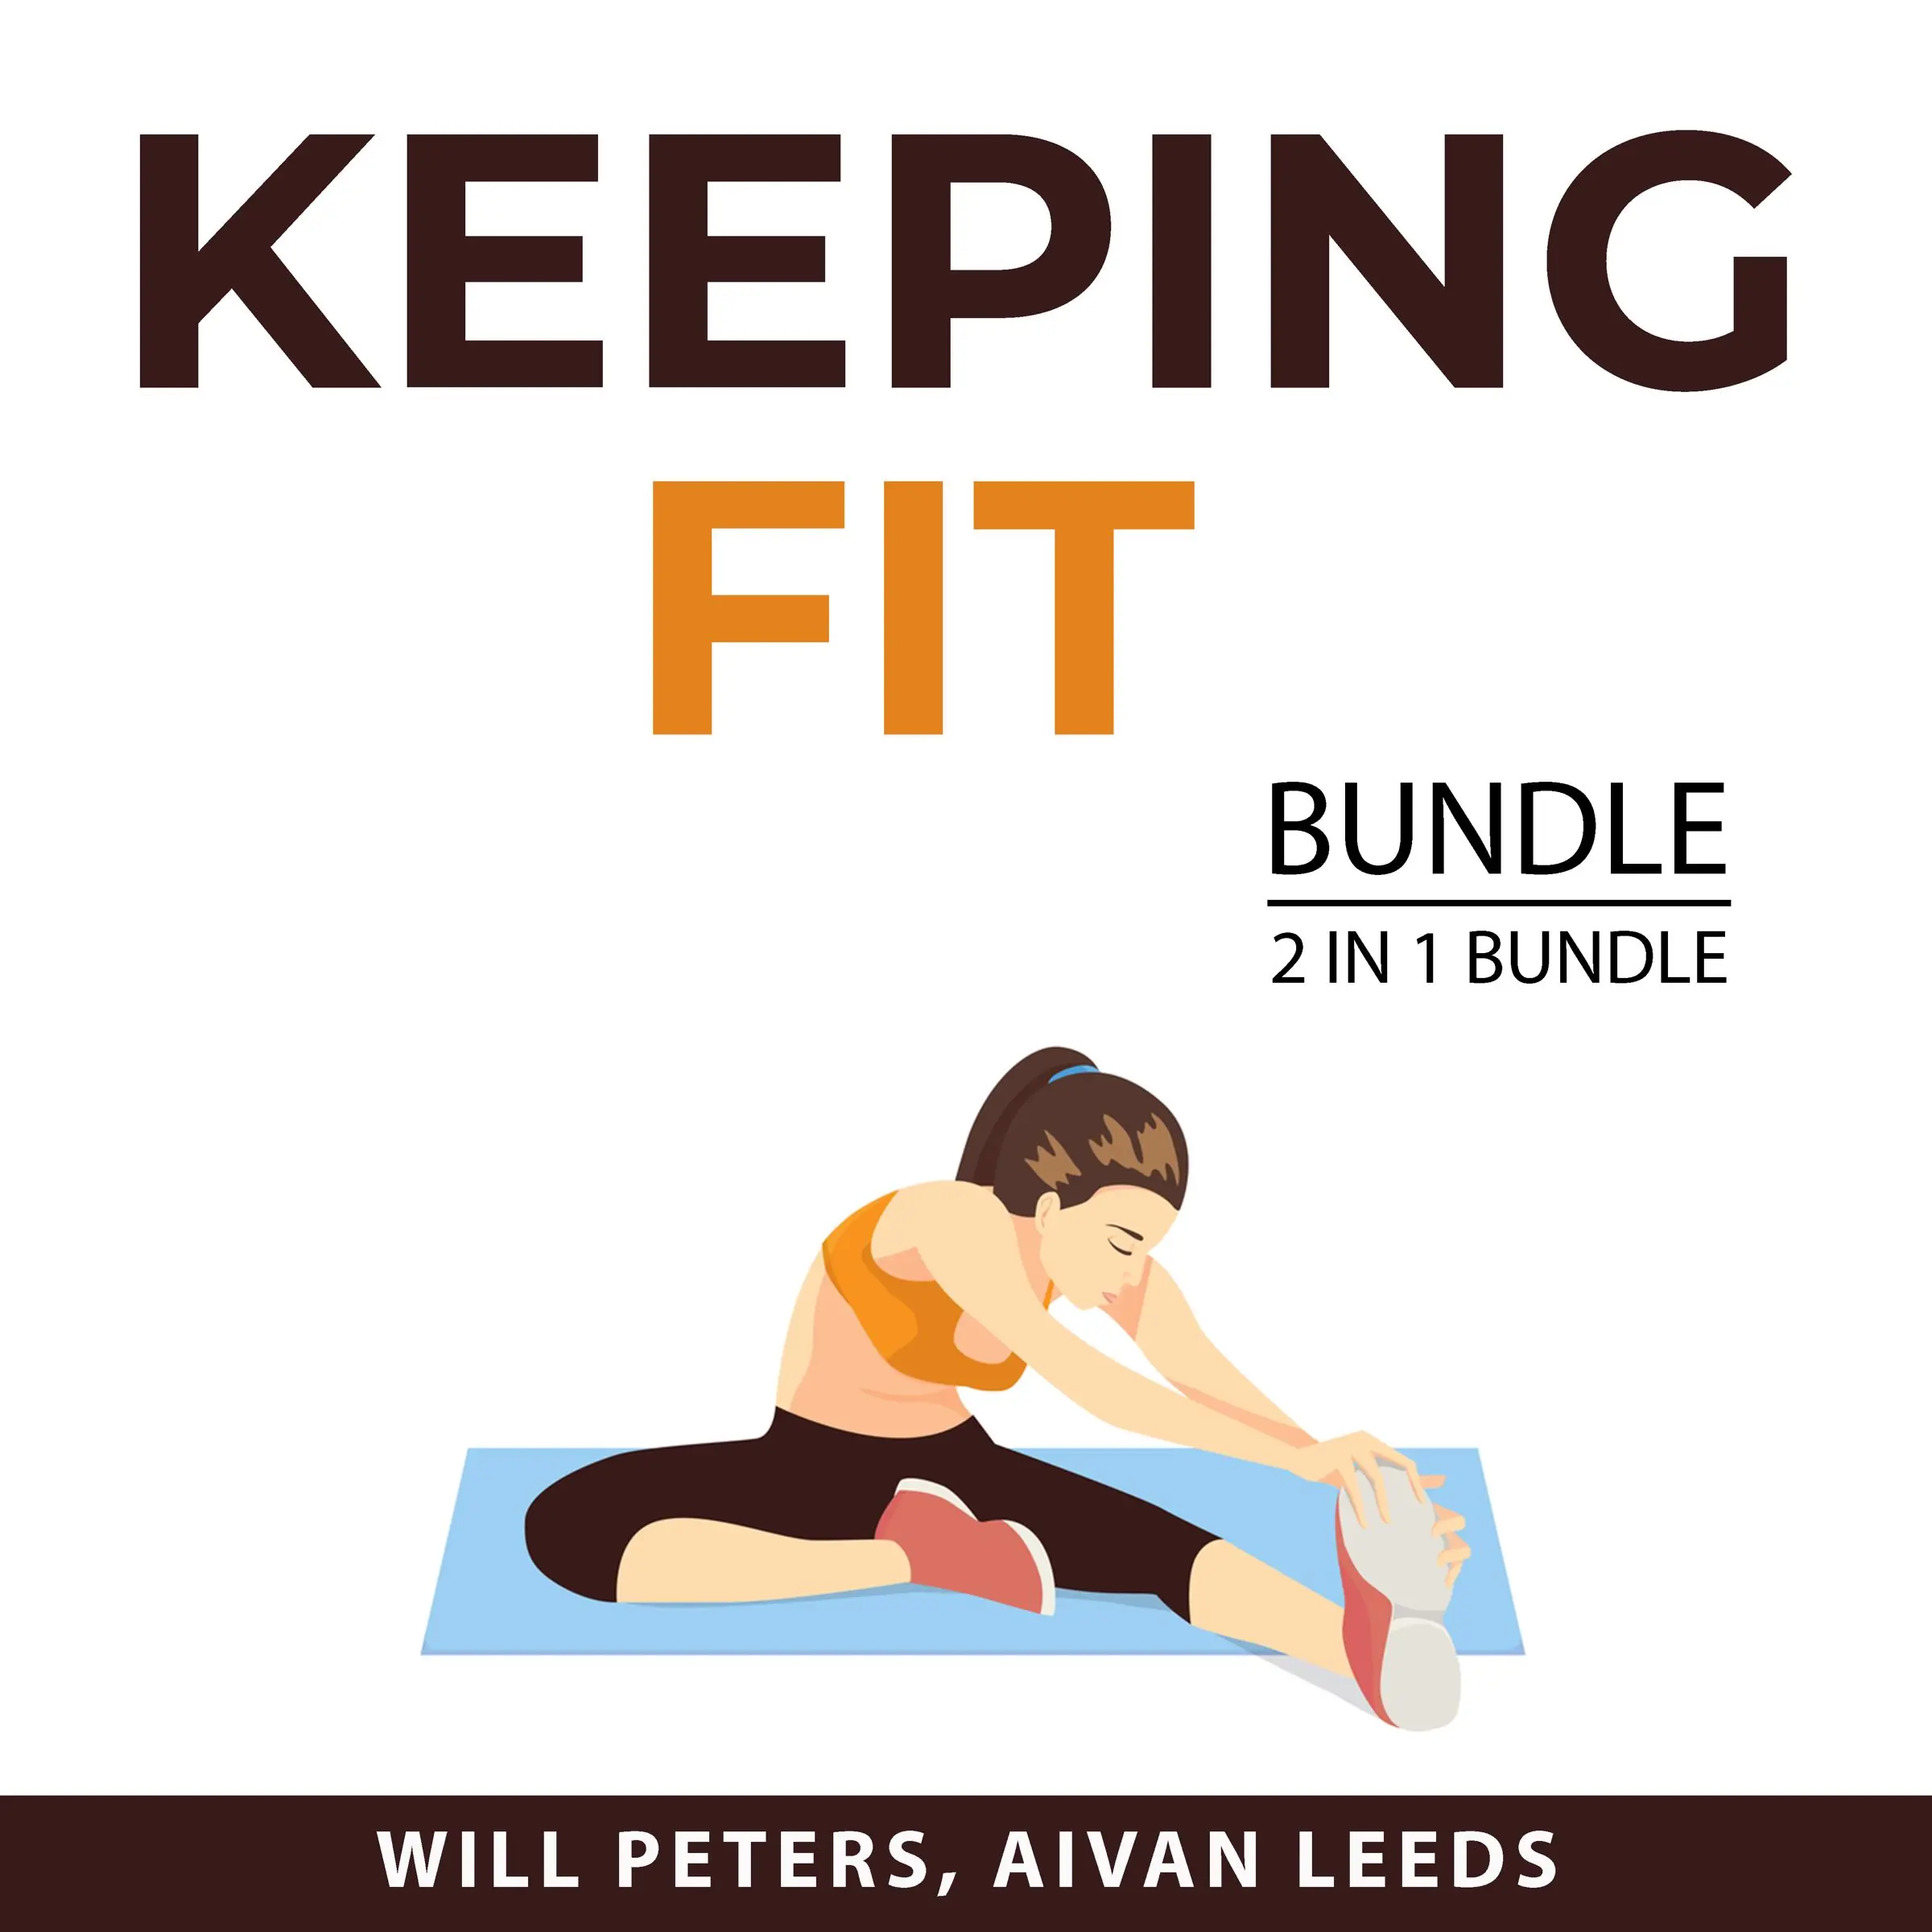 Keeping Fit Bundle, 2 IN 1 Bundle: The Bicycling Guide and Slow Jogging Audiobook by Aivan Leeds